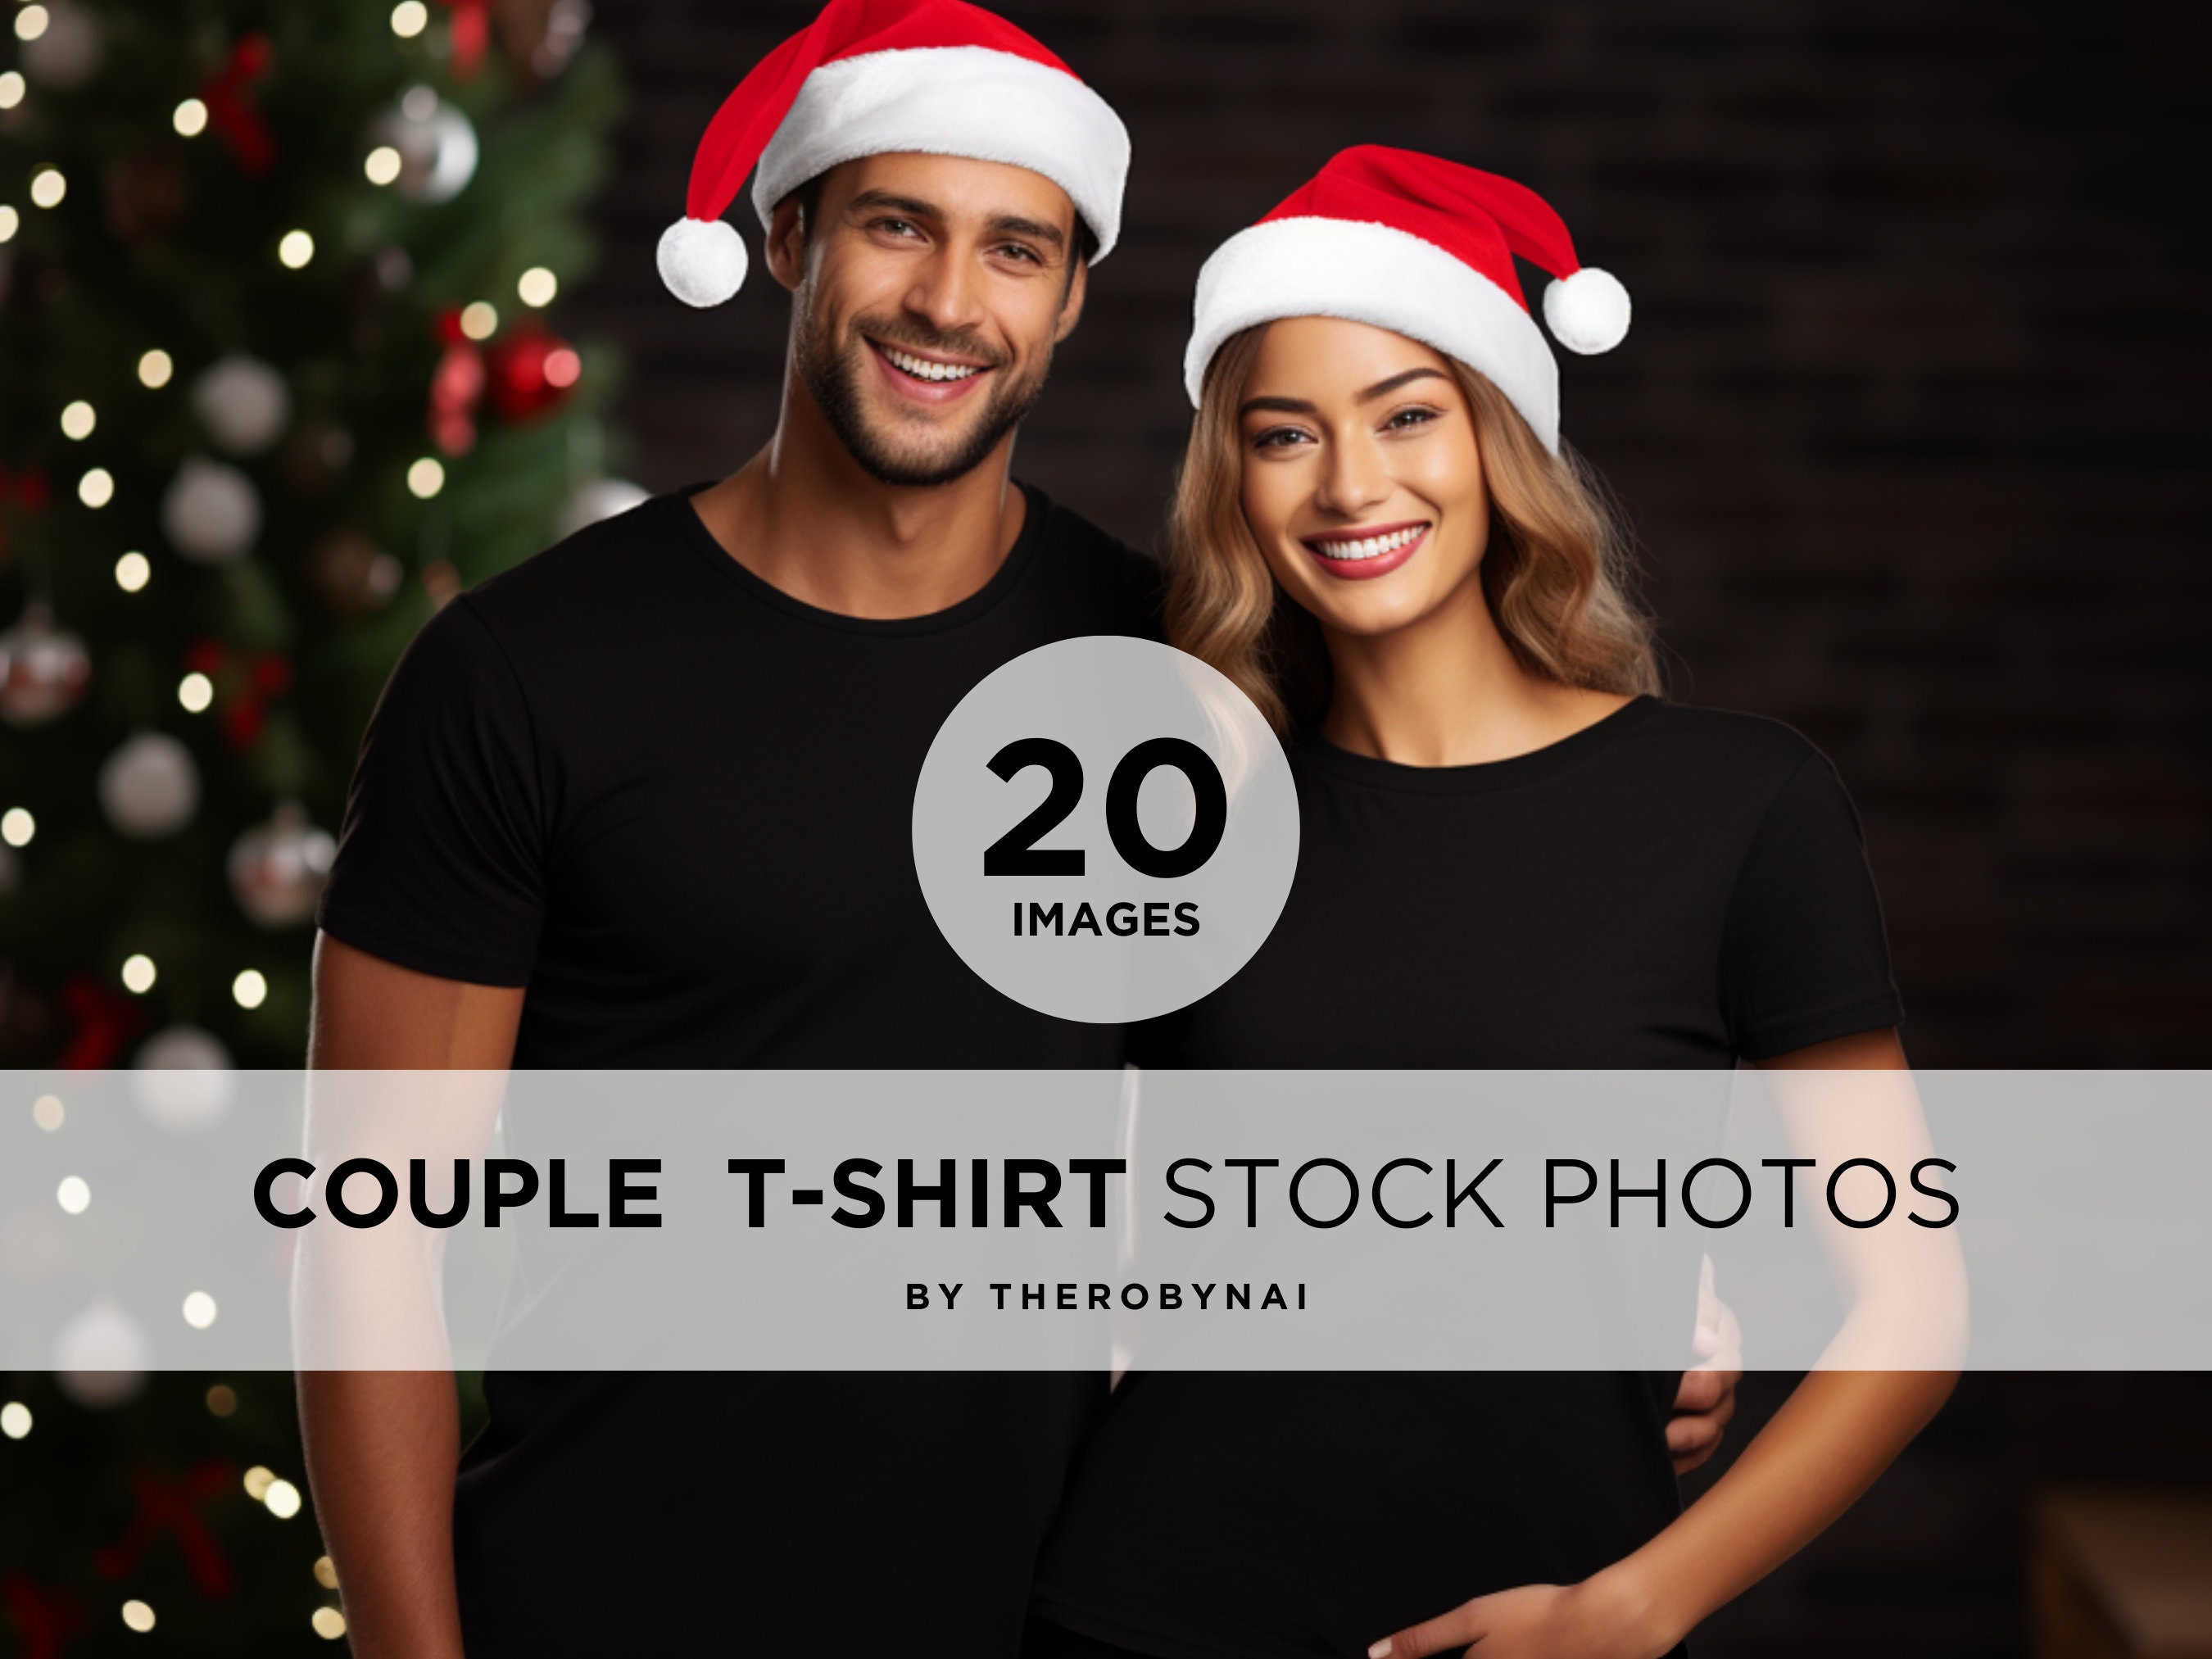 Online Dating Couple Matching Outfits - Cute Tinder Match Outfits for Couples T-shirts